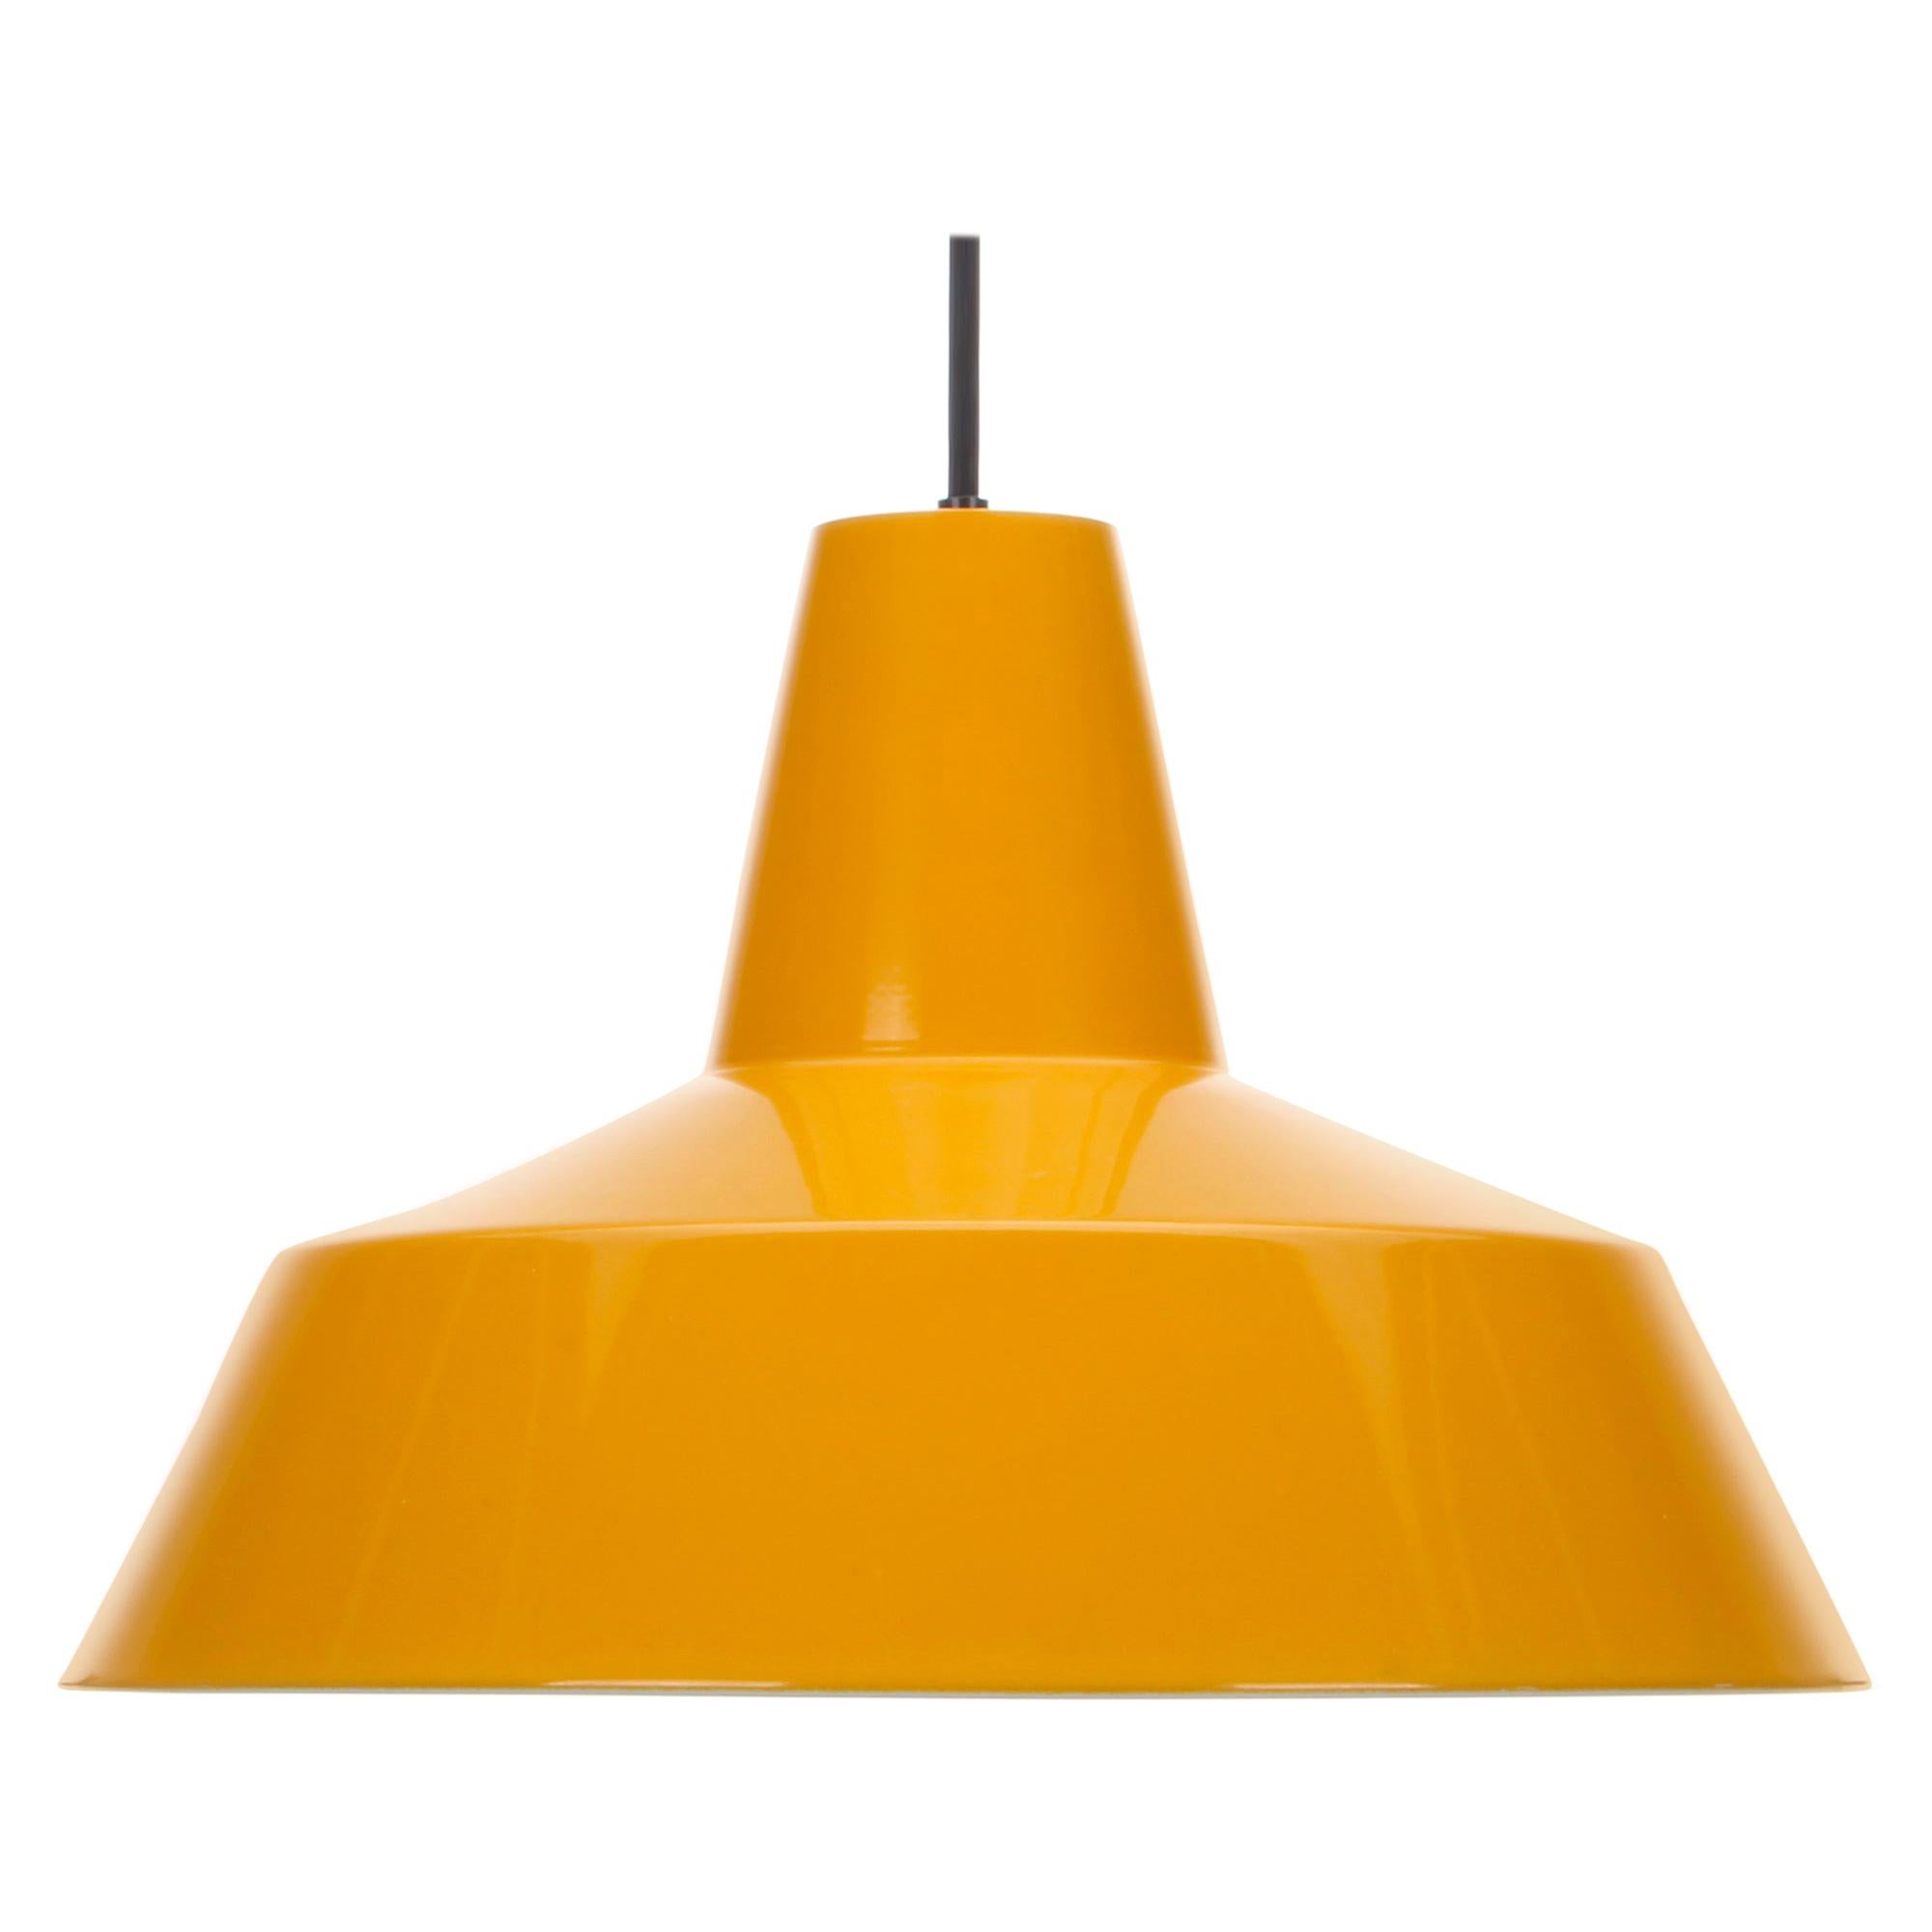 Yellow Workshop Lamp by Nordisk Solar Compagni, 1980s, Yellow Industrial Pendant